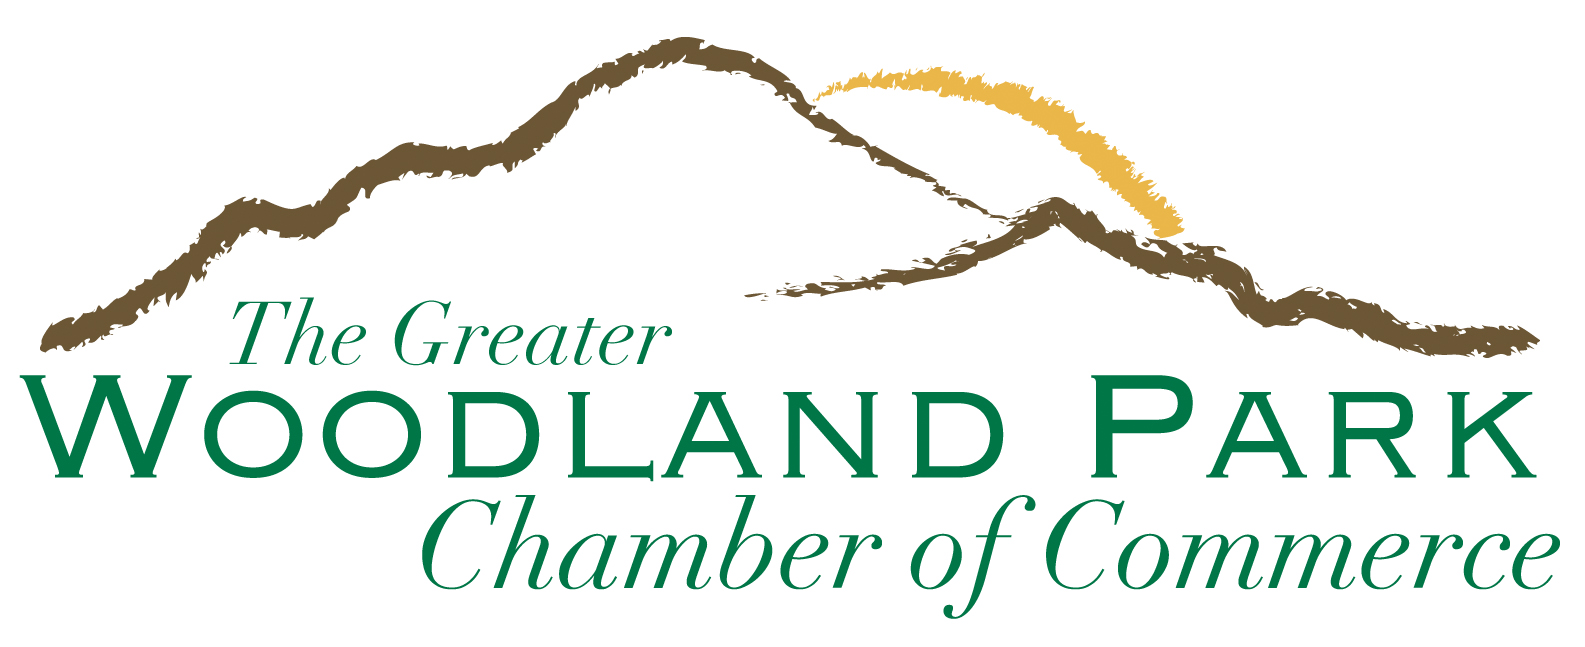 The Greater Woodland Park Chamber of Commerce